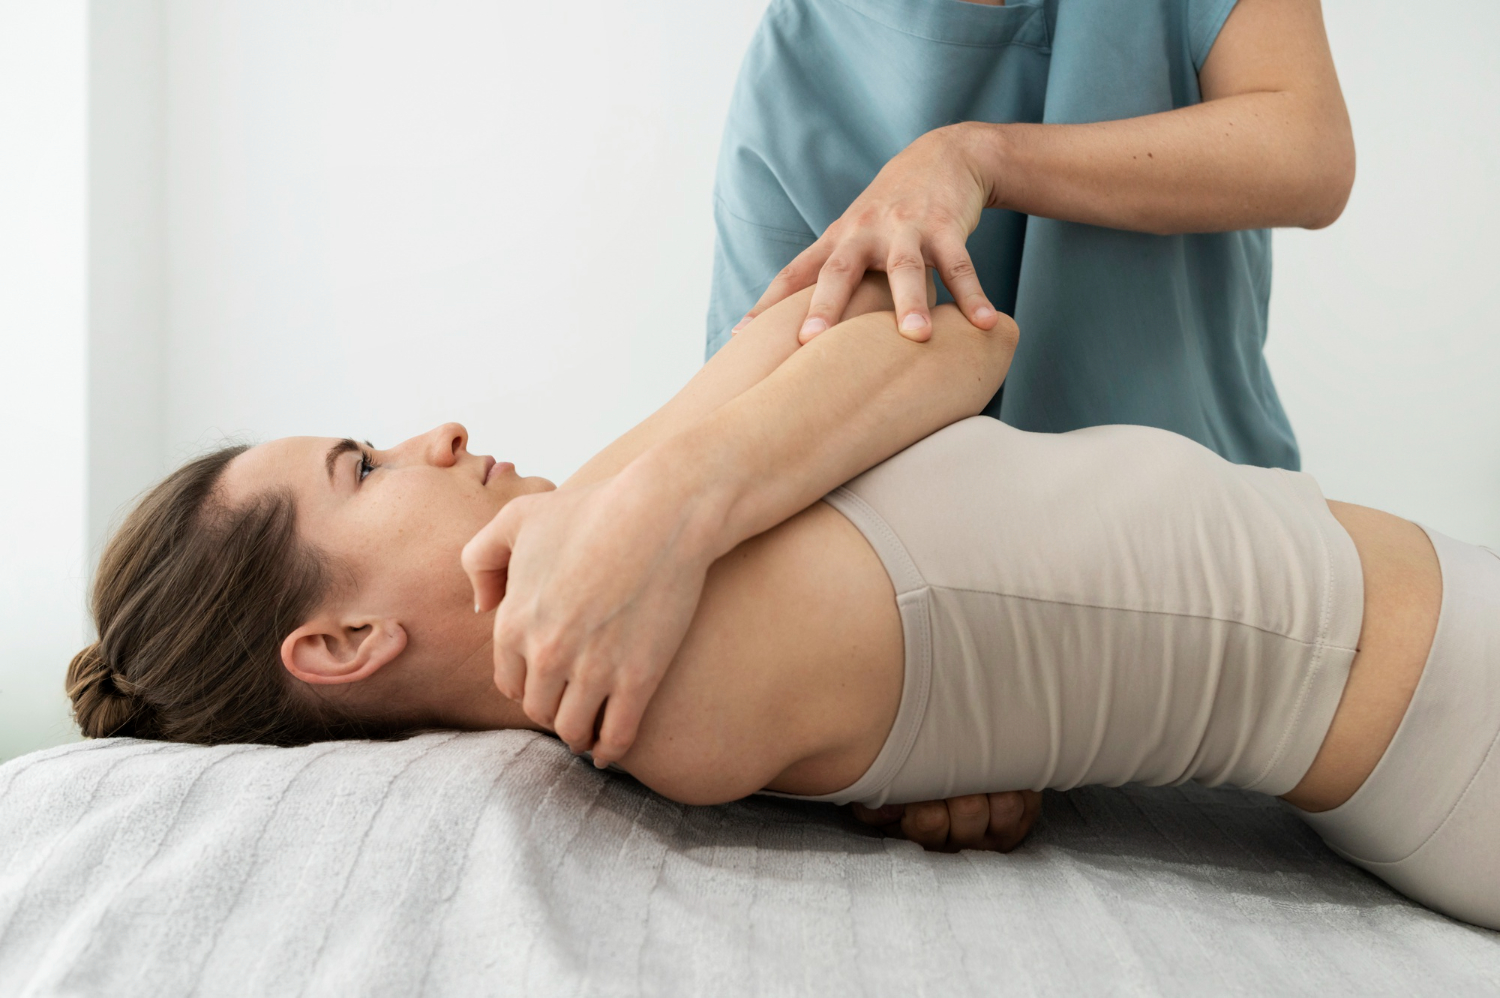 Massage for back-pain relief